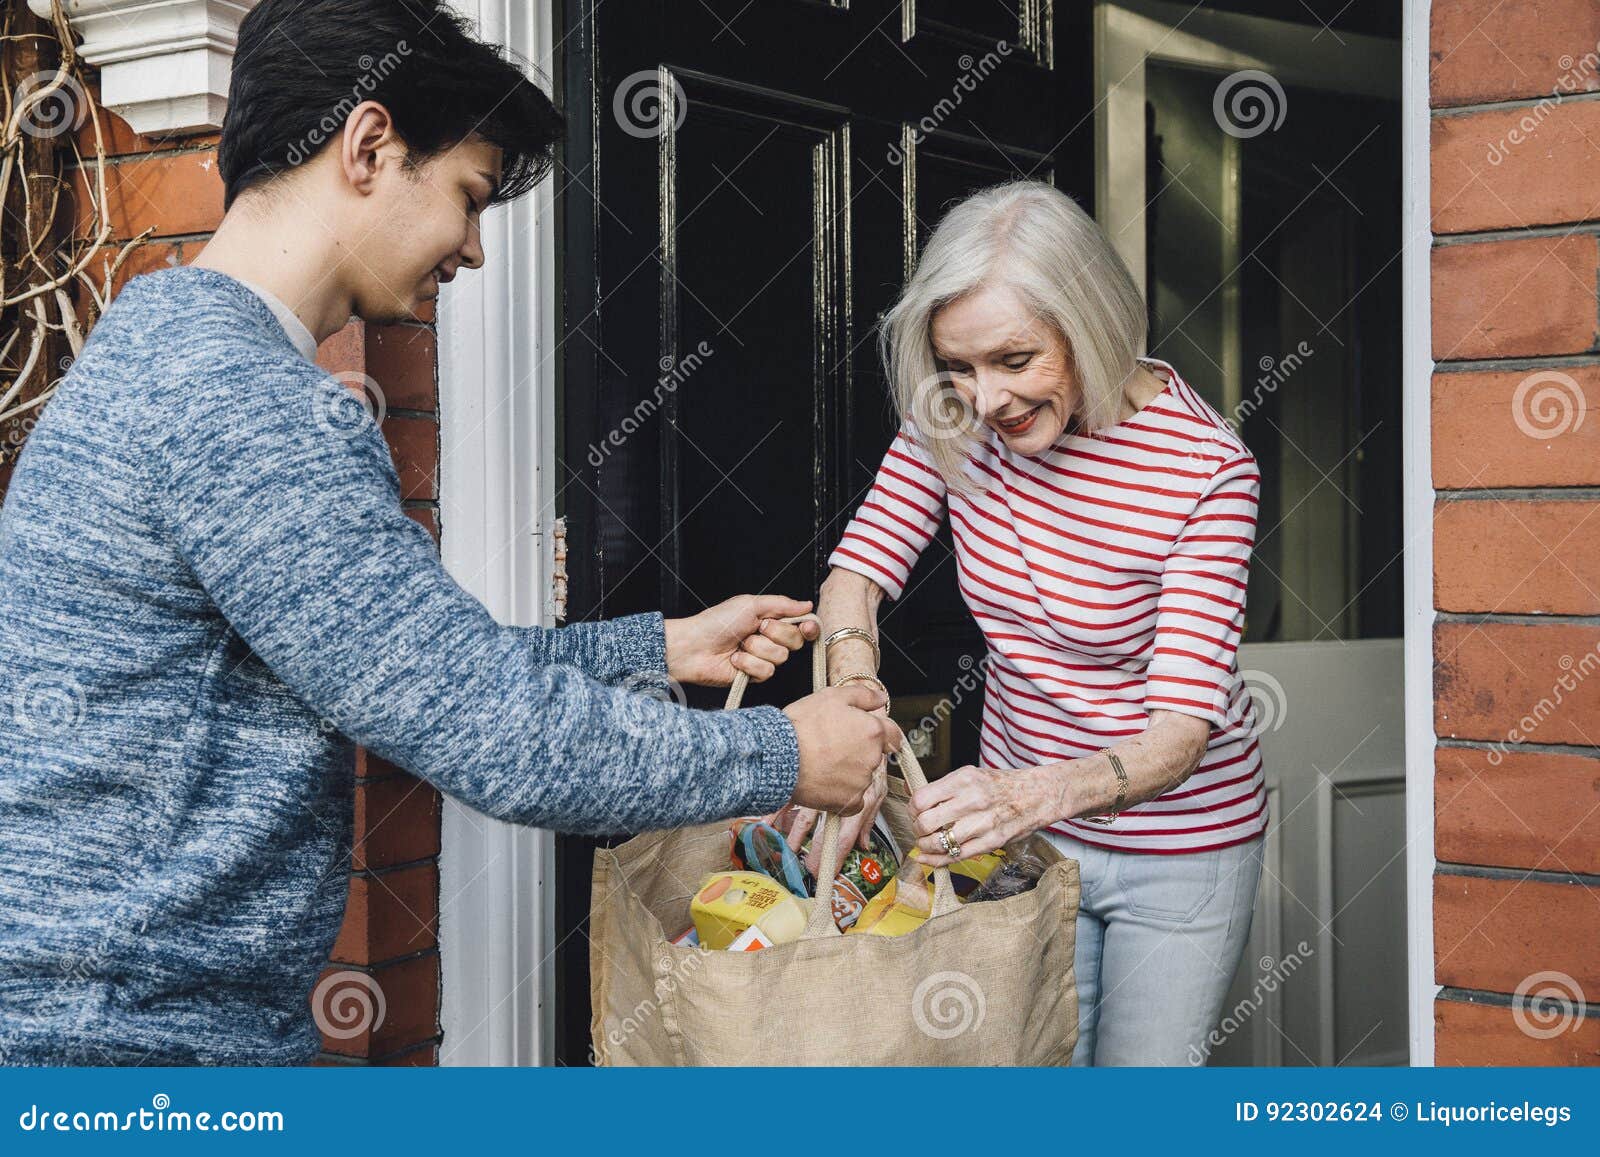 delivering groceries to the elderly